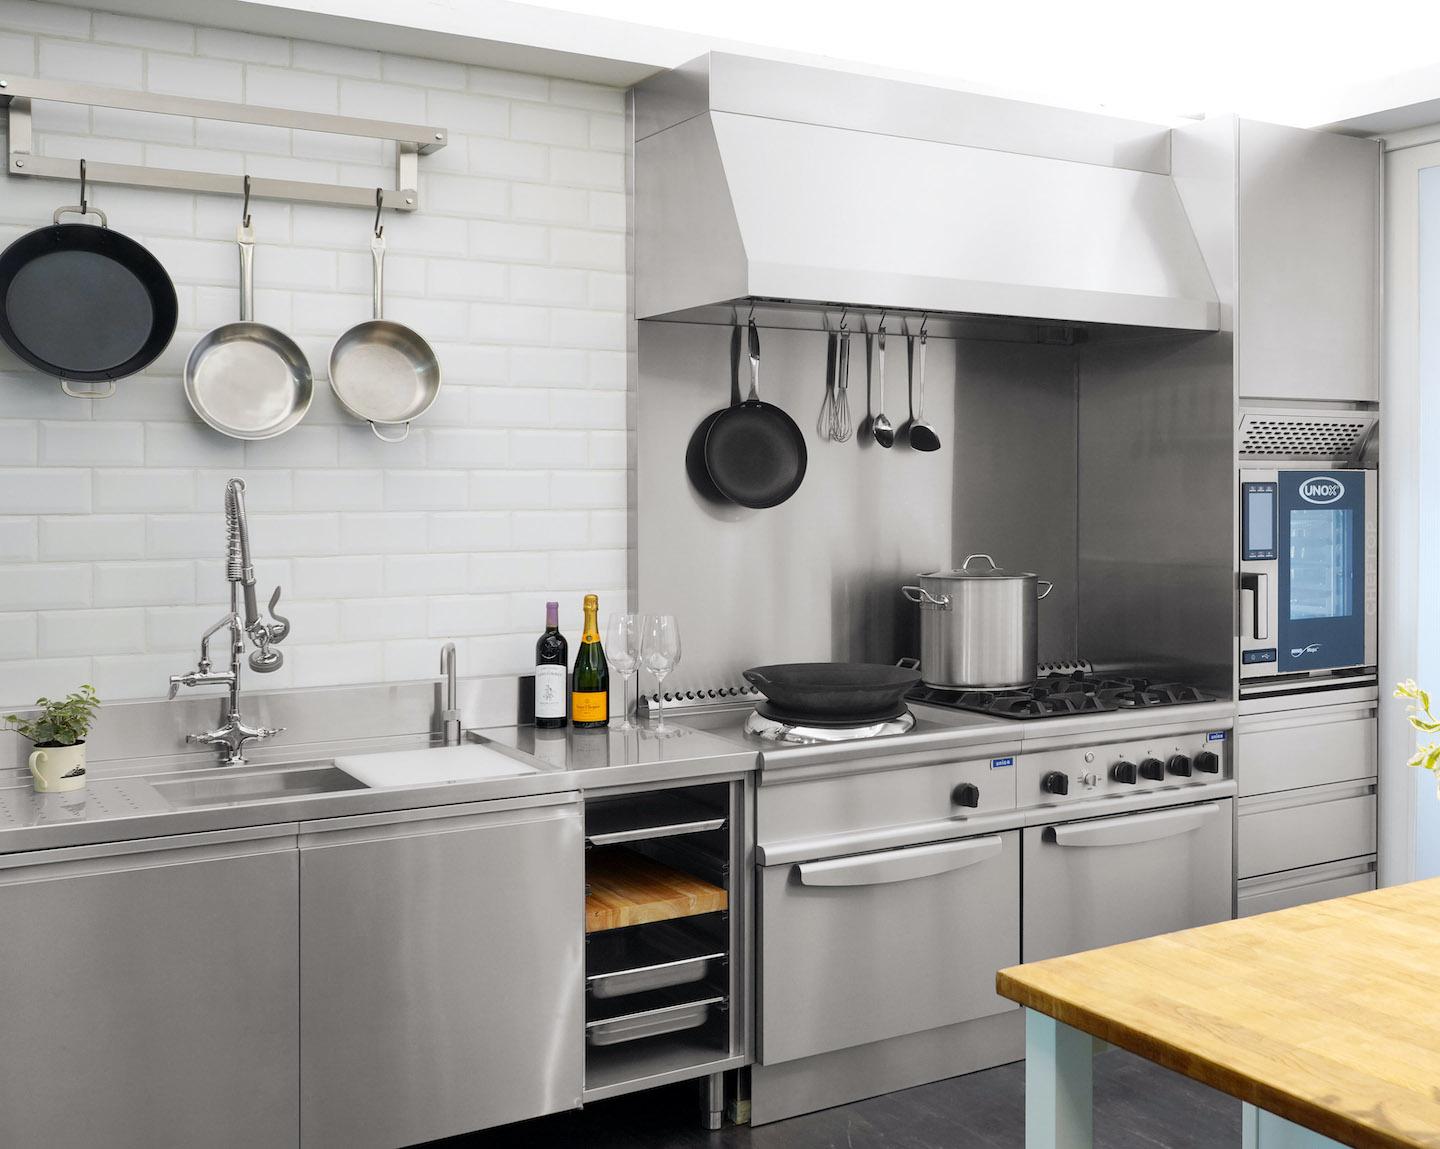 Unico® Cooking System | Home Journal